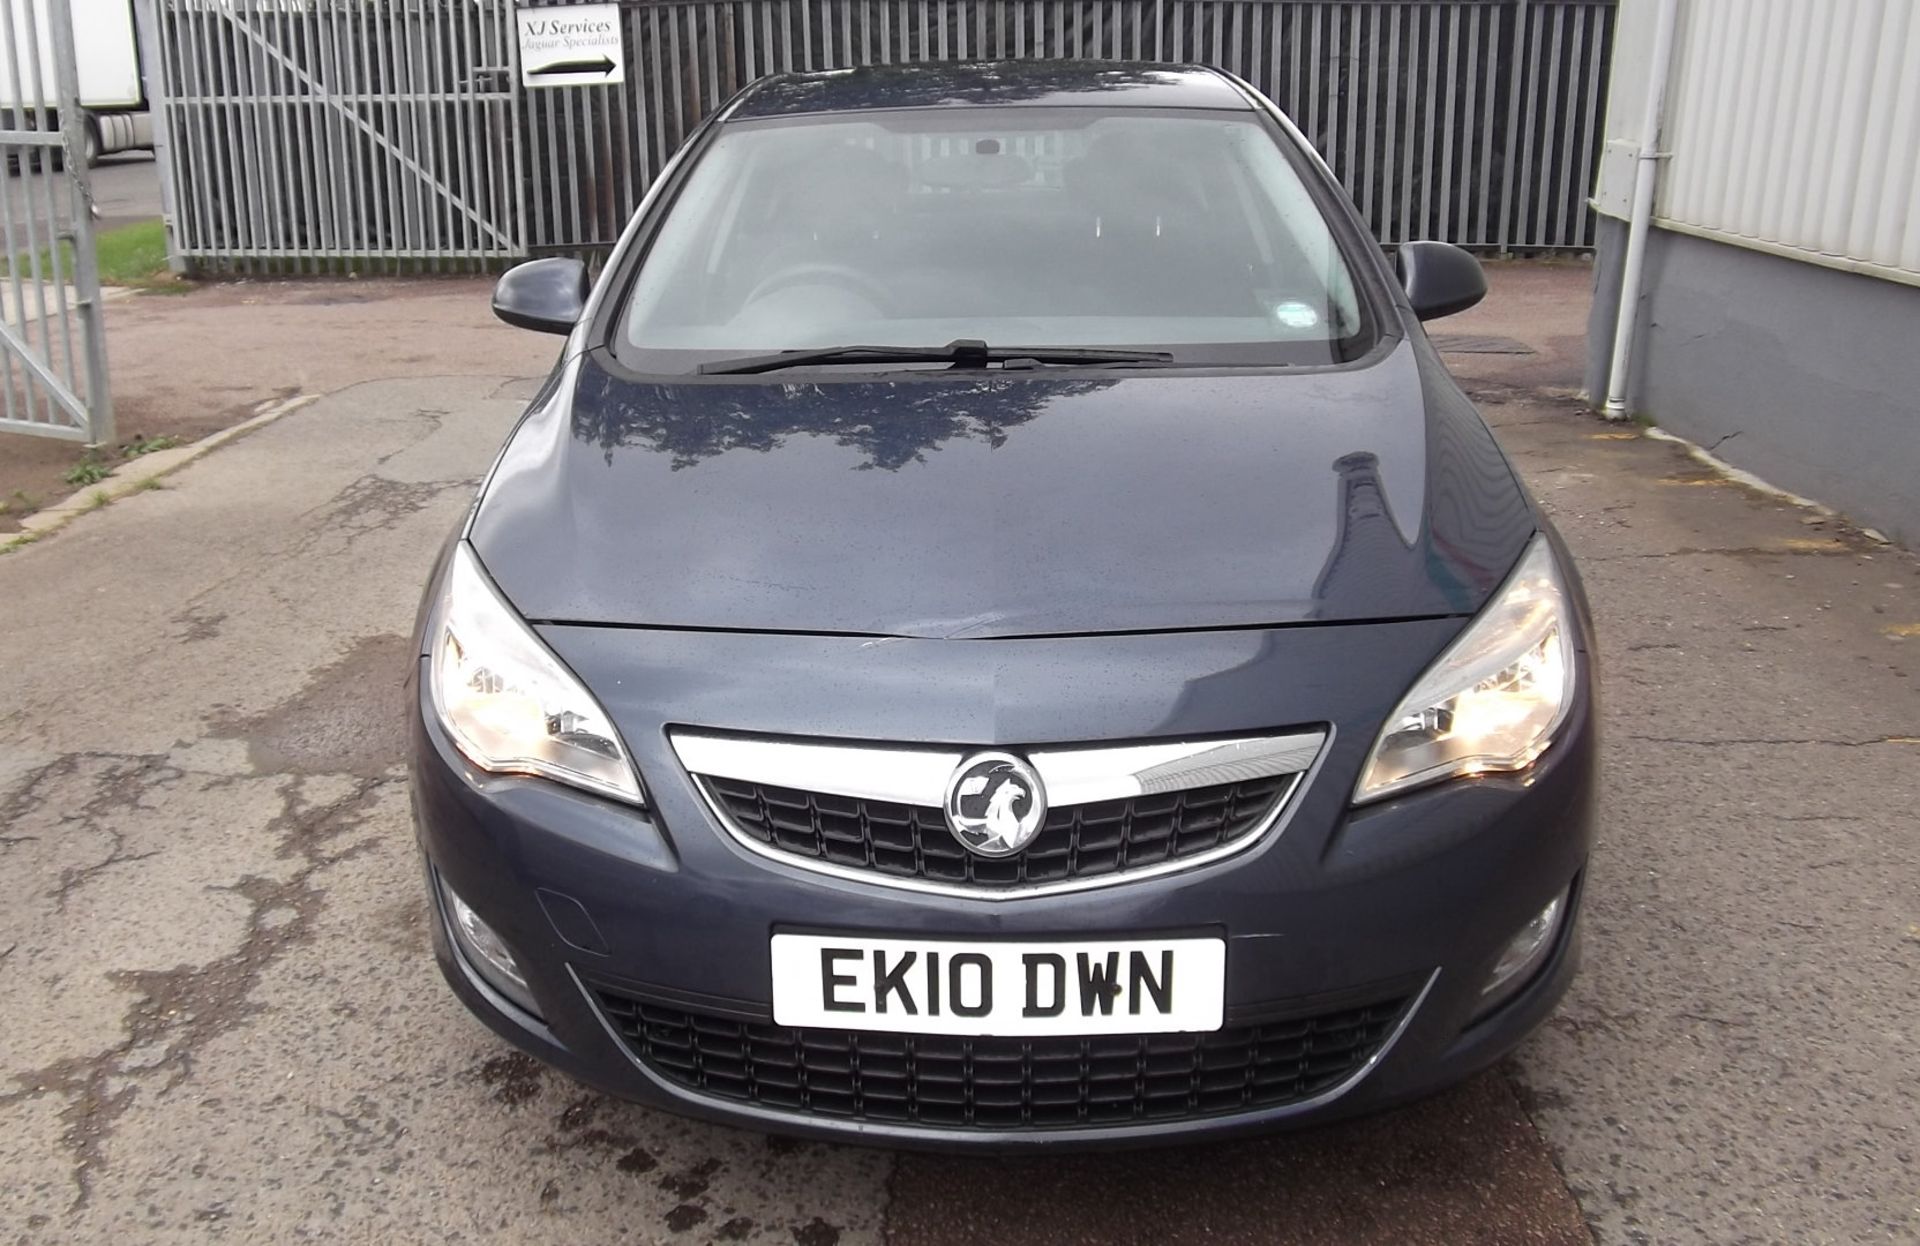 2010 Vauxhall Astra 1.6 Exclusive 5 Door Hatchback - CL505 - NO VAT ON THE HAMMER - Location: Corby, - Image 2 of 9